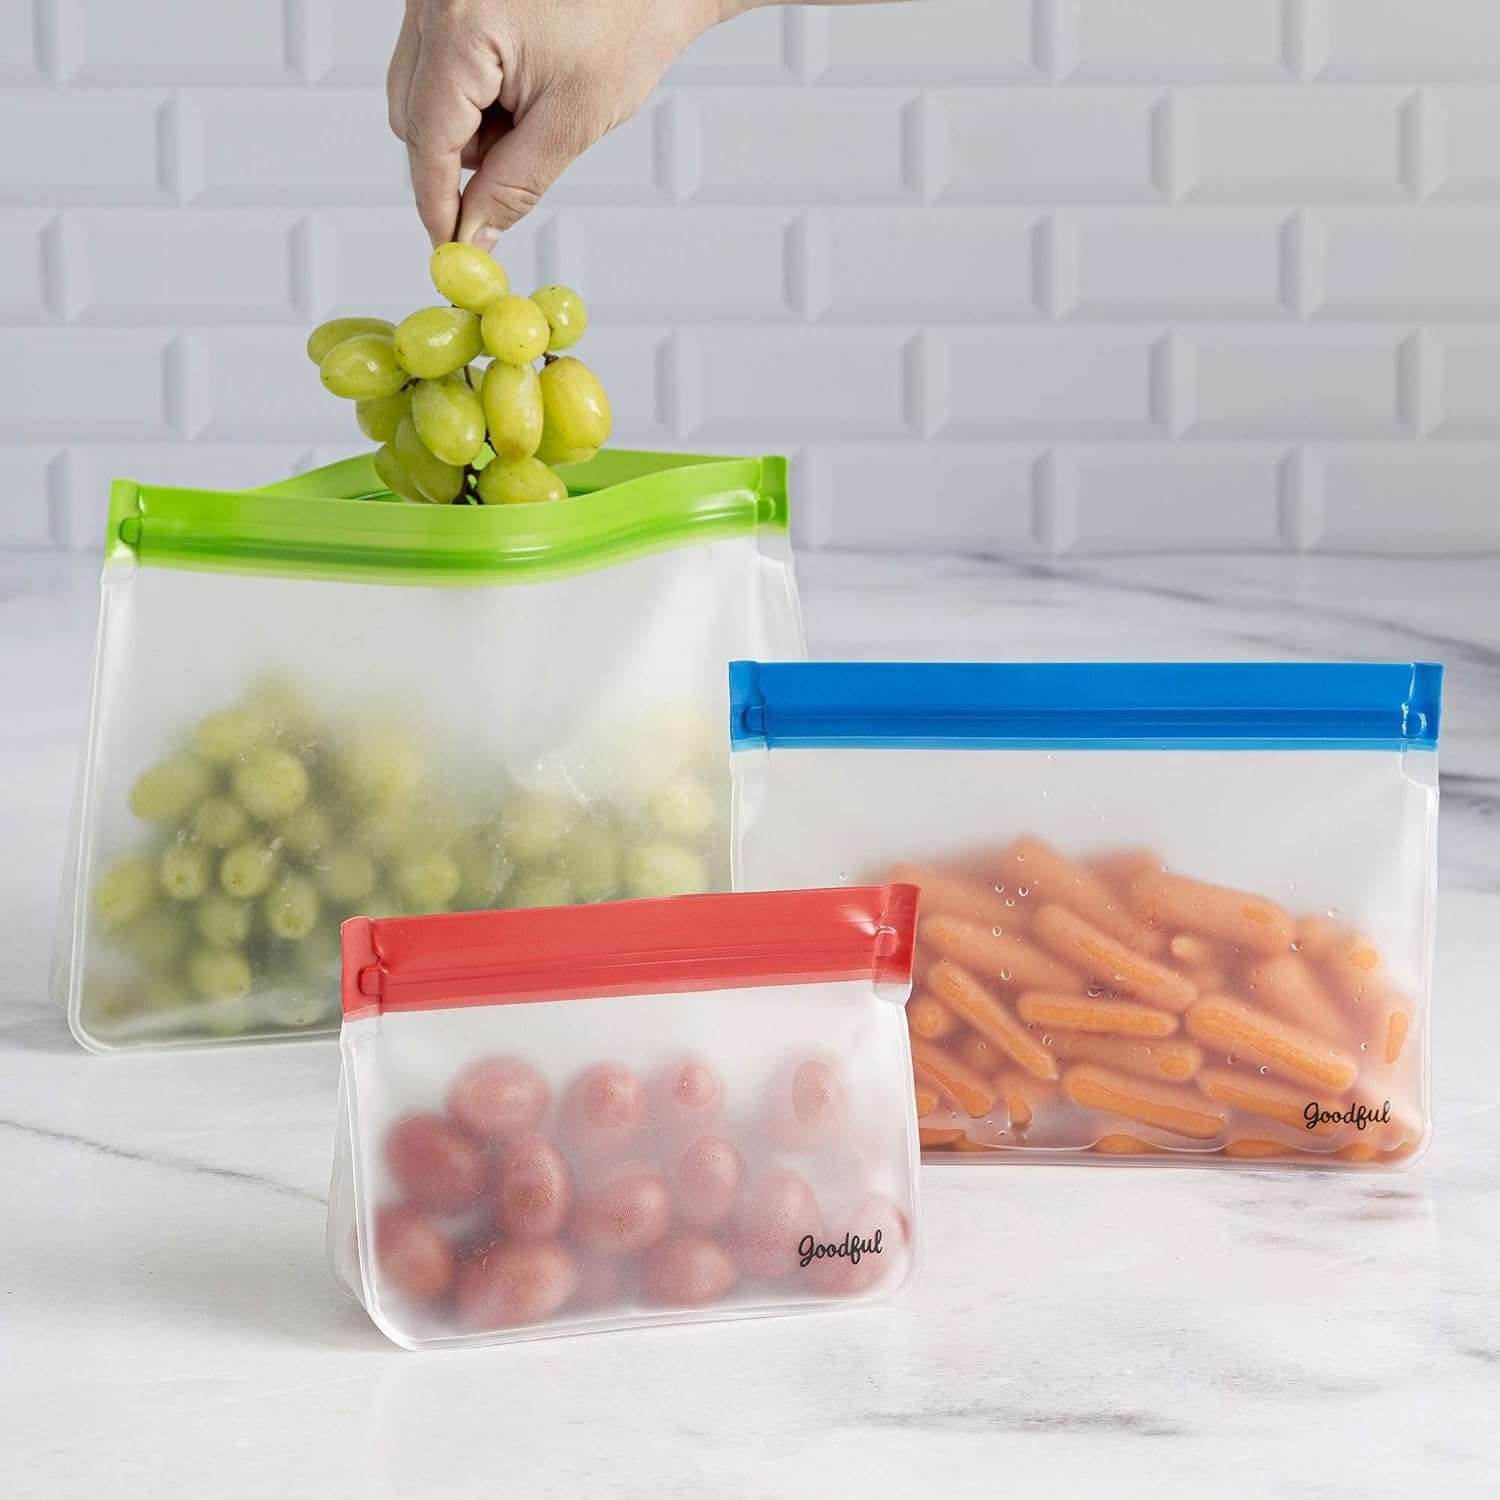 Hand placing grapes into an open reusable storage bag with two more filled bags beside it